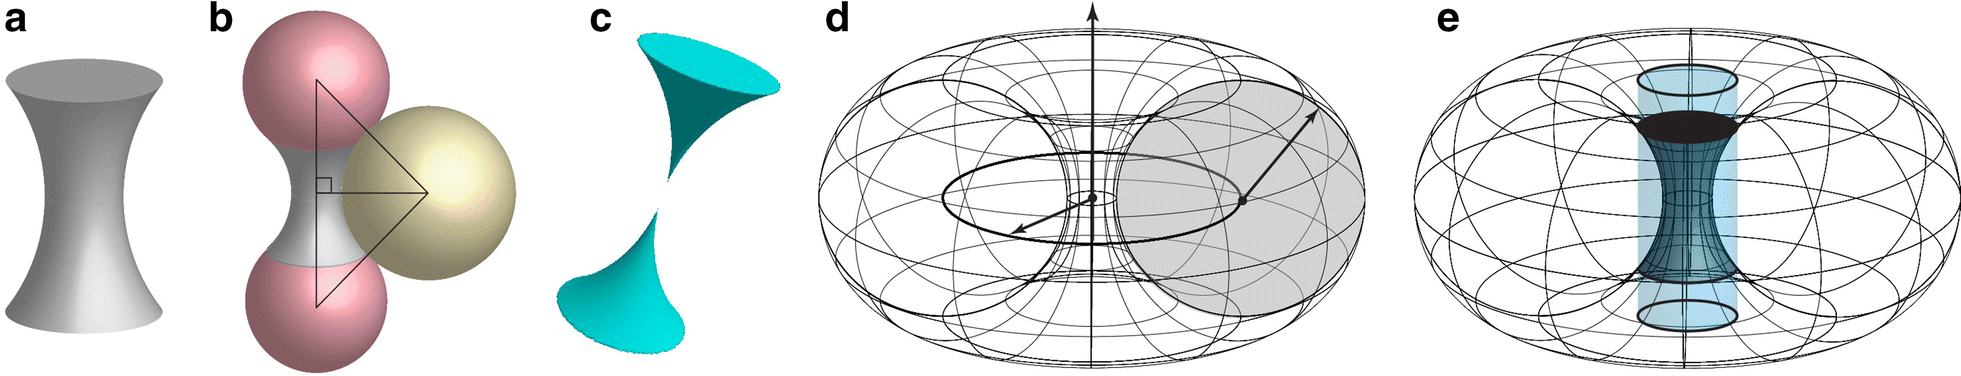 Fig. 5